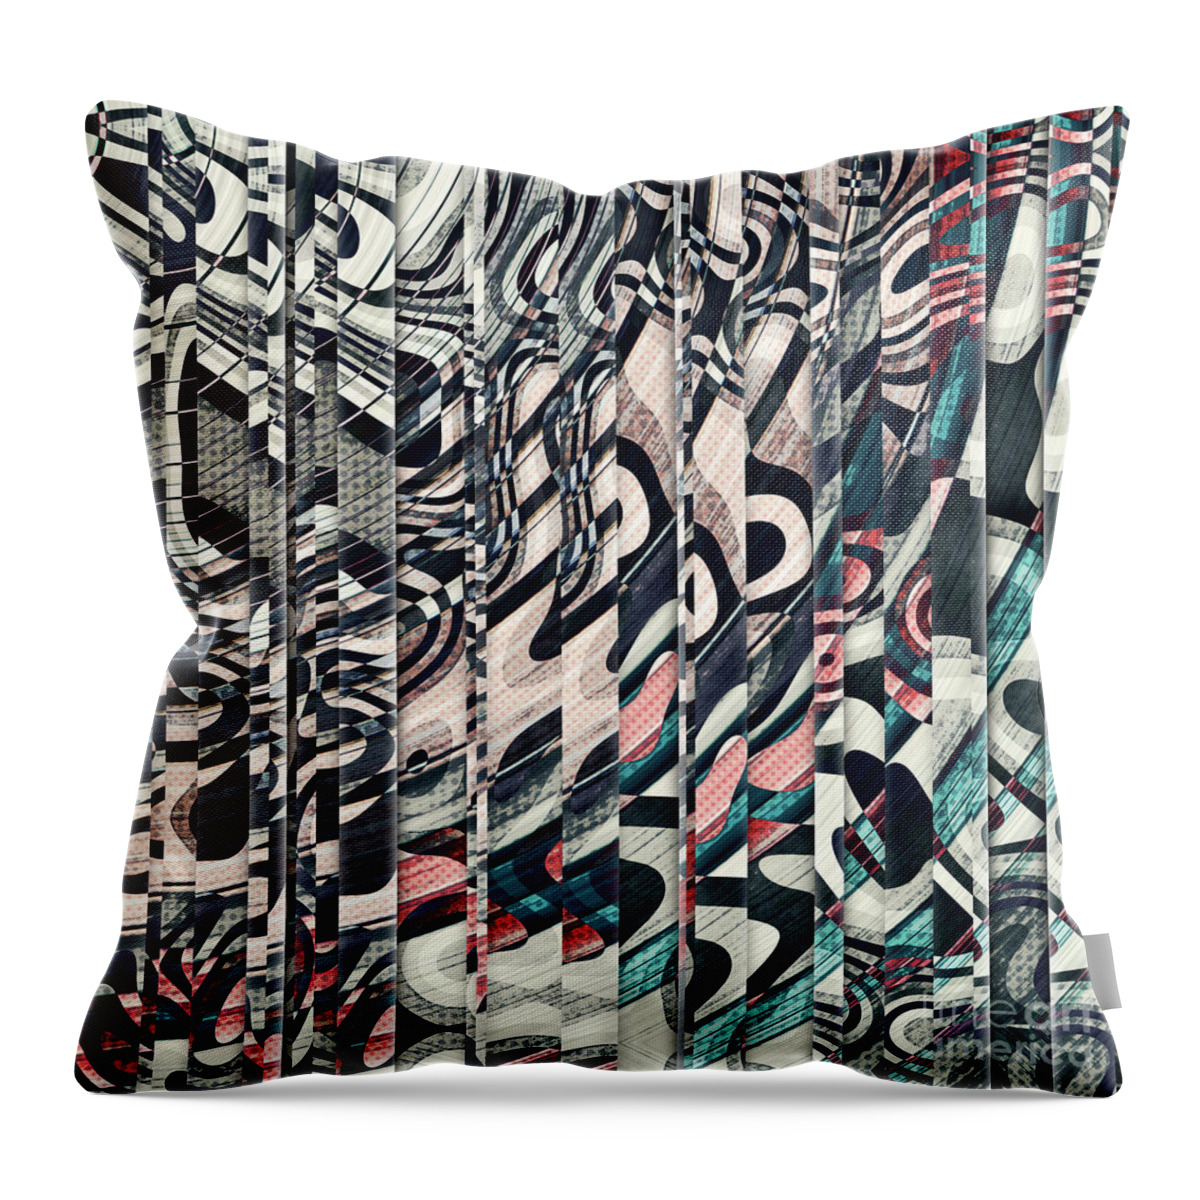 Layers Throw Pillow featuring the digital art Vertical Graphic Layers by Phil Perkins